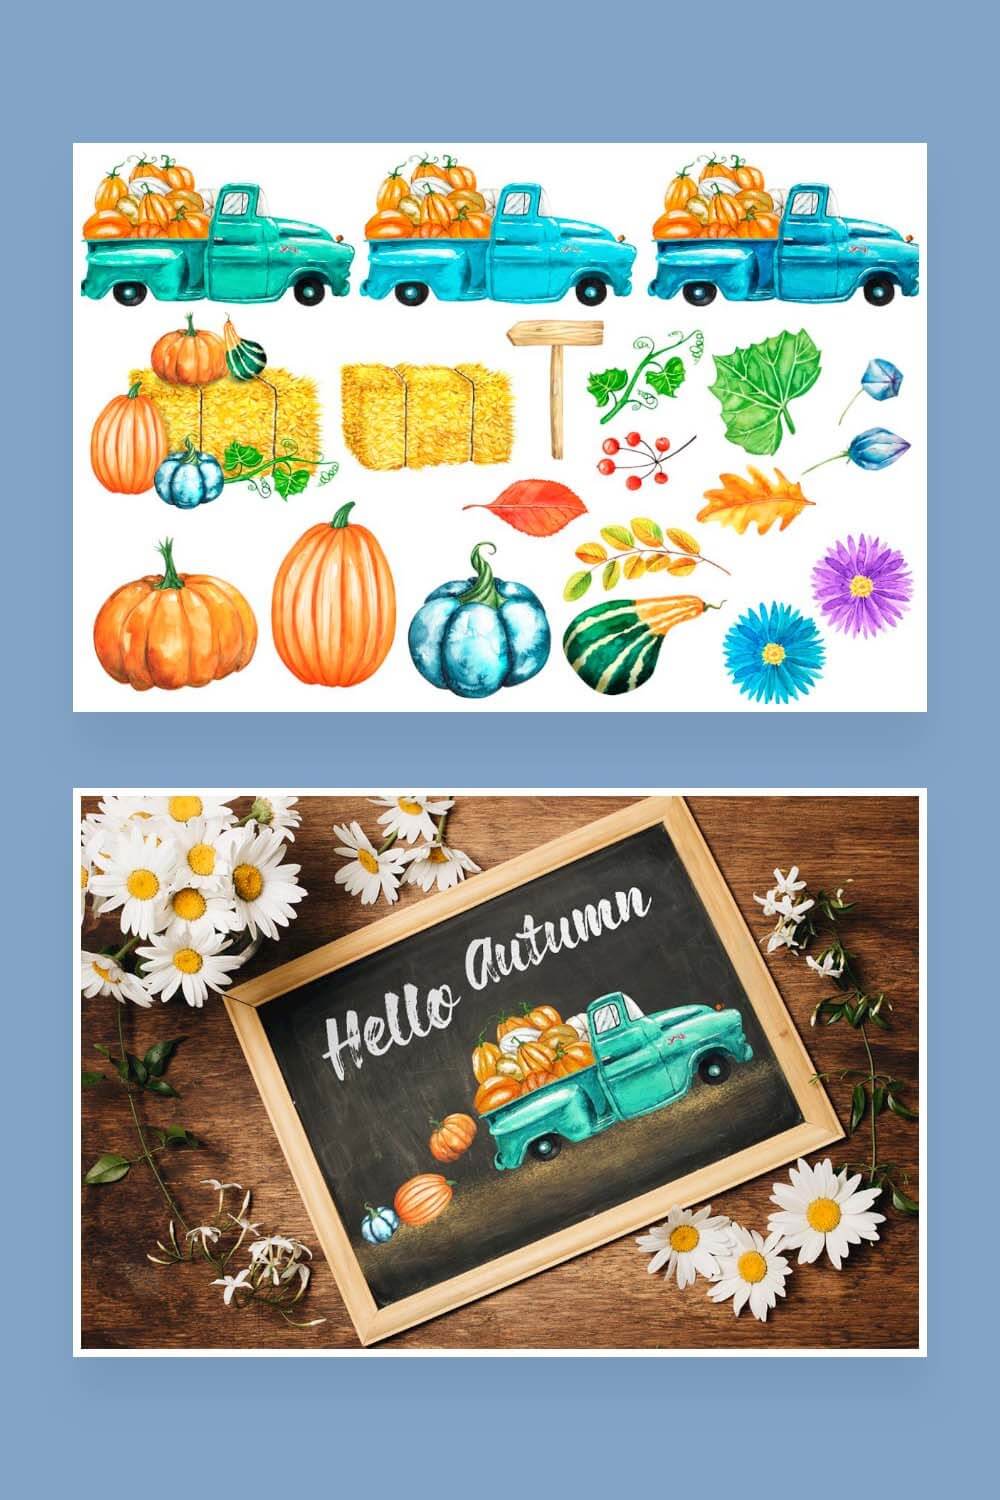 Two pictures: an autumn harvest festival with a vintage pickup truck and pumpkins, a picture with a pickup truck loaded with pumpkins.